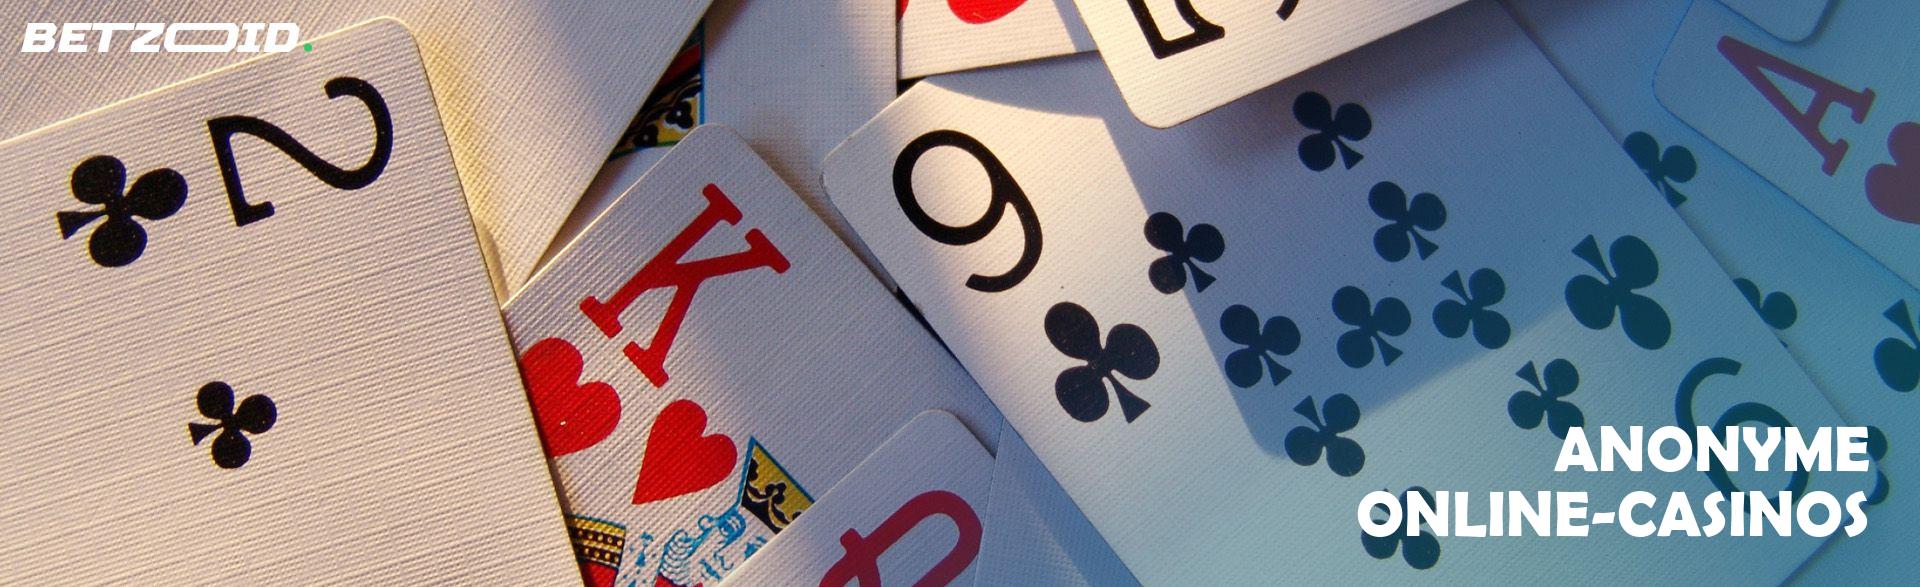 Anonyme Online-Casinos.